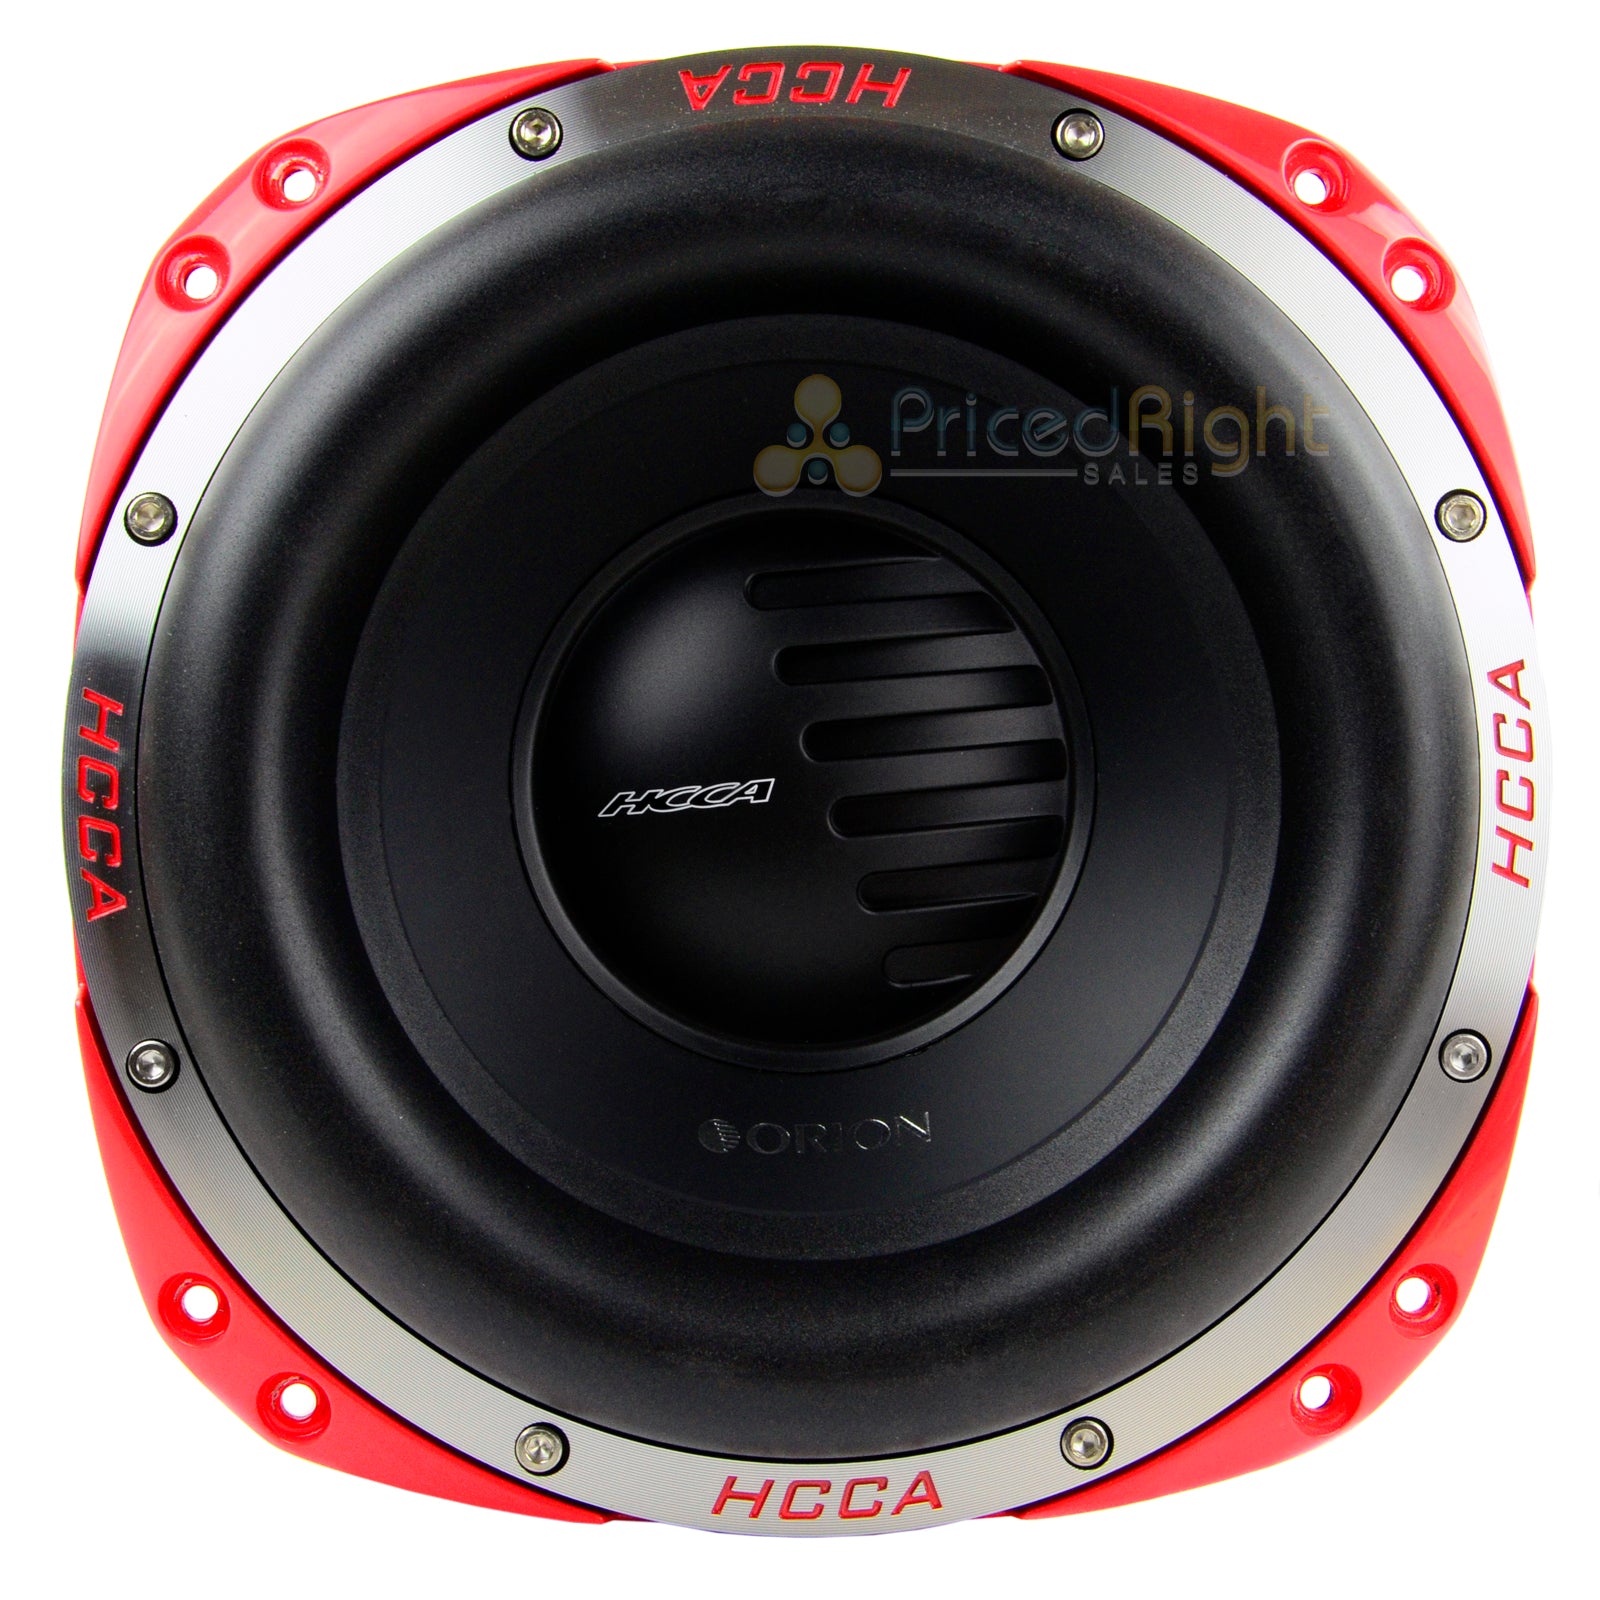 Orion HCCA104 10" Subwoofer 2000W Rms 8000W Peak Dual 4 Ohm Bass Competition Sub